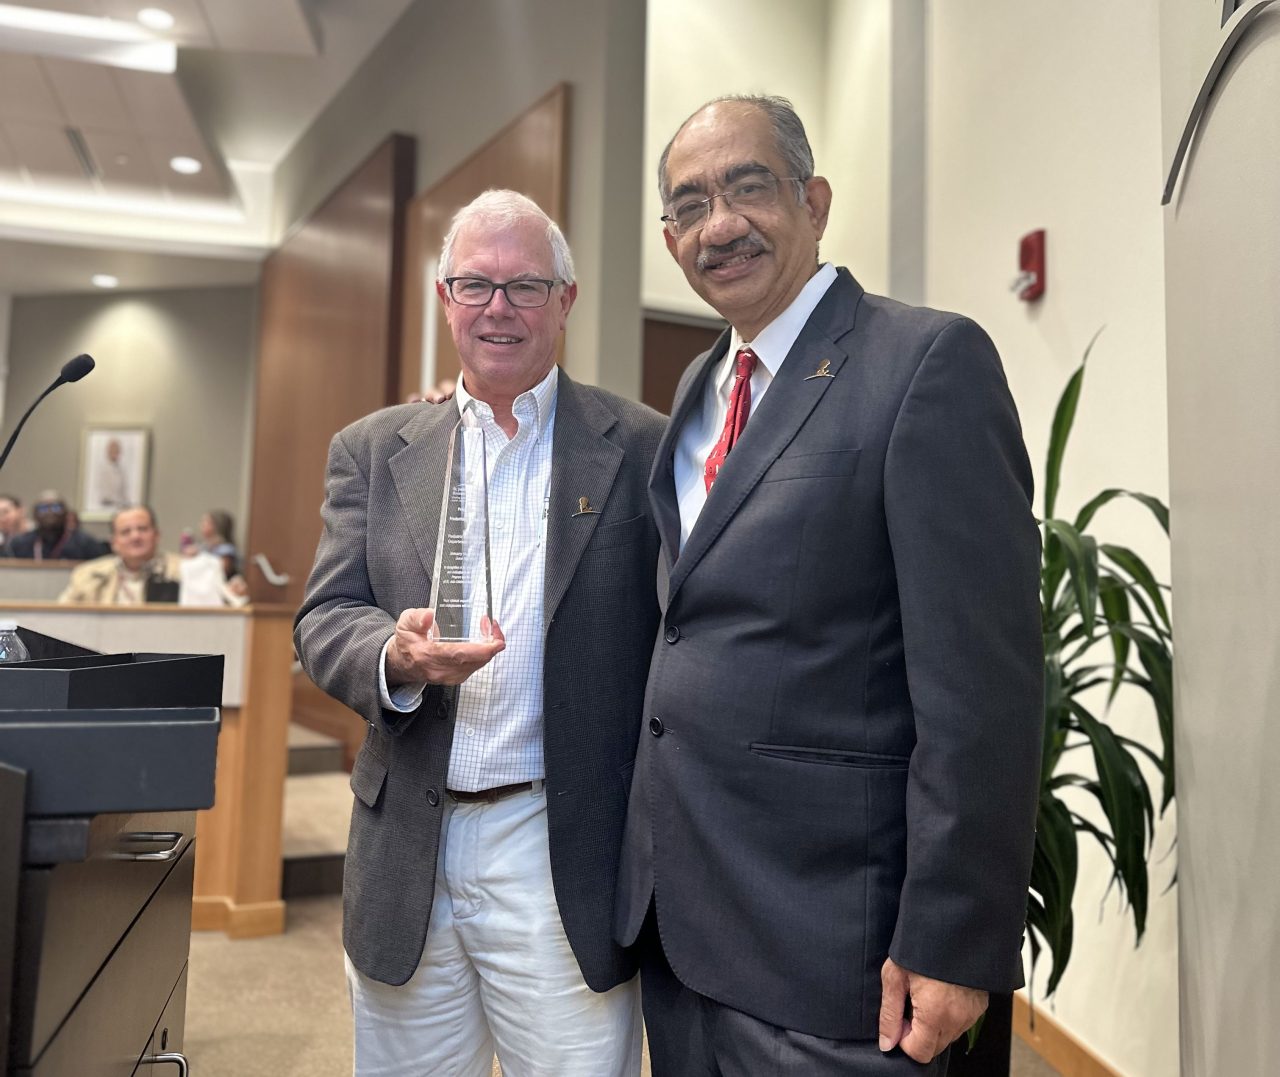 Amar Gajjar: Honored to have presented Dr. Frederick Boop, with an award that recognizes his dedication to providing brain tumor patients with the most optimal neurosurgical care.